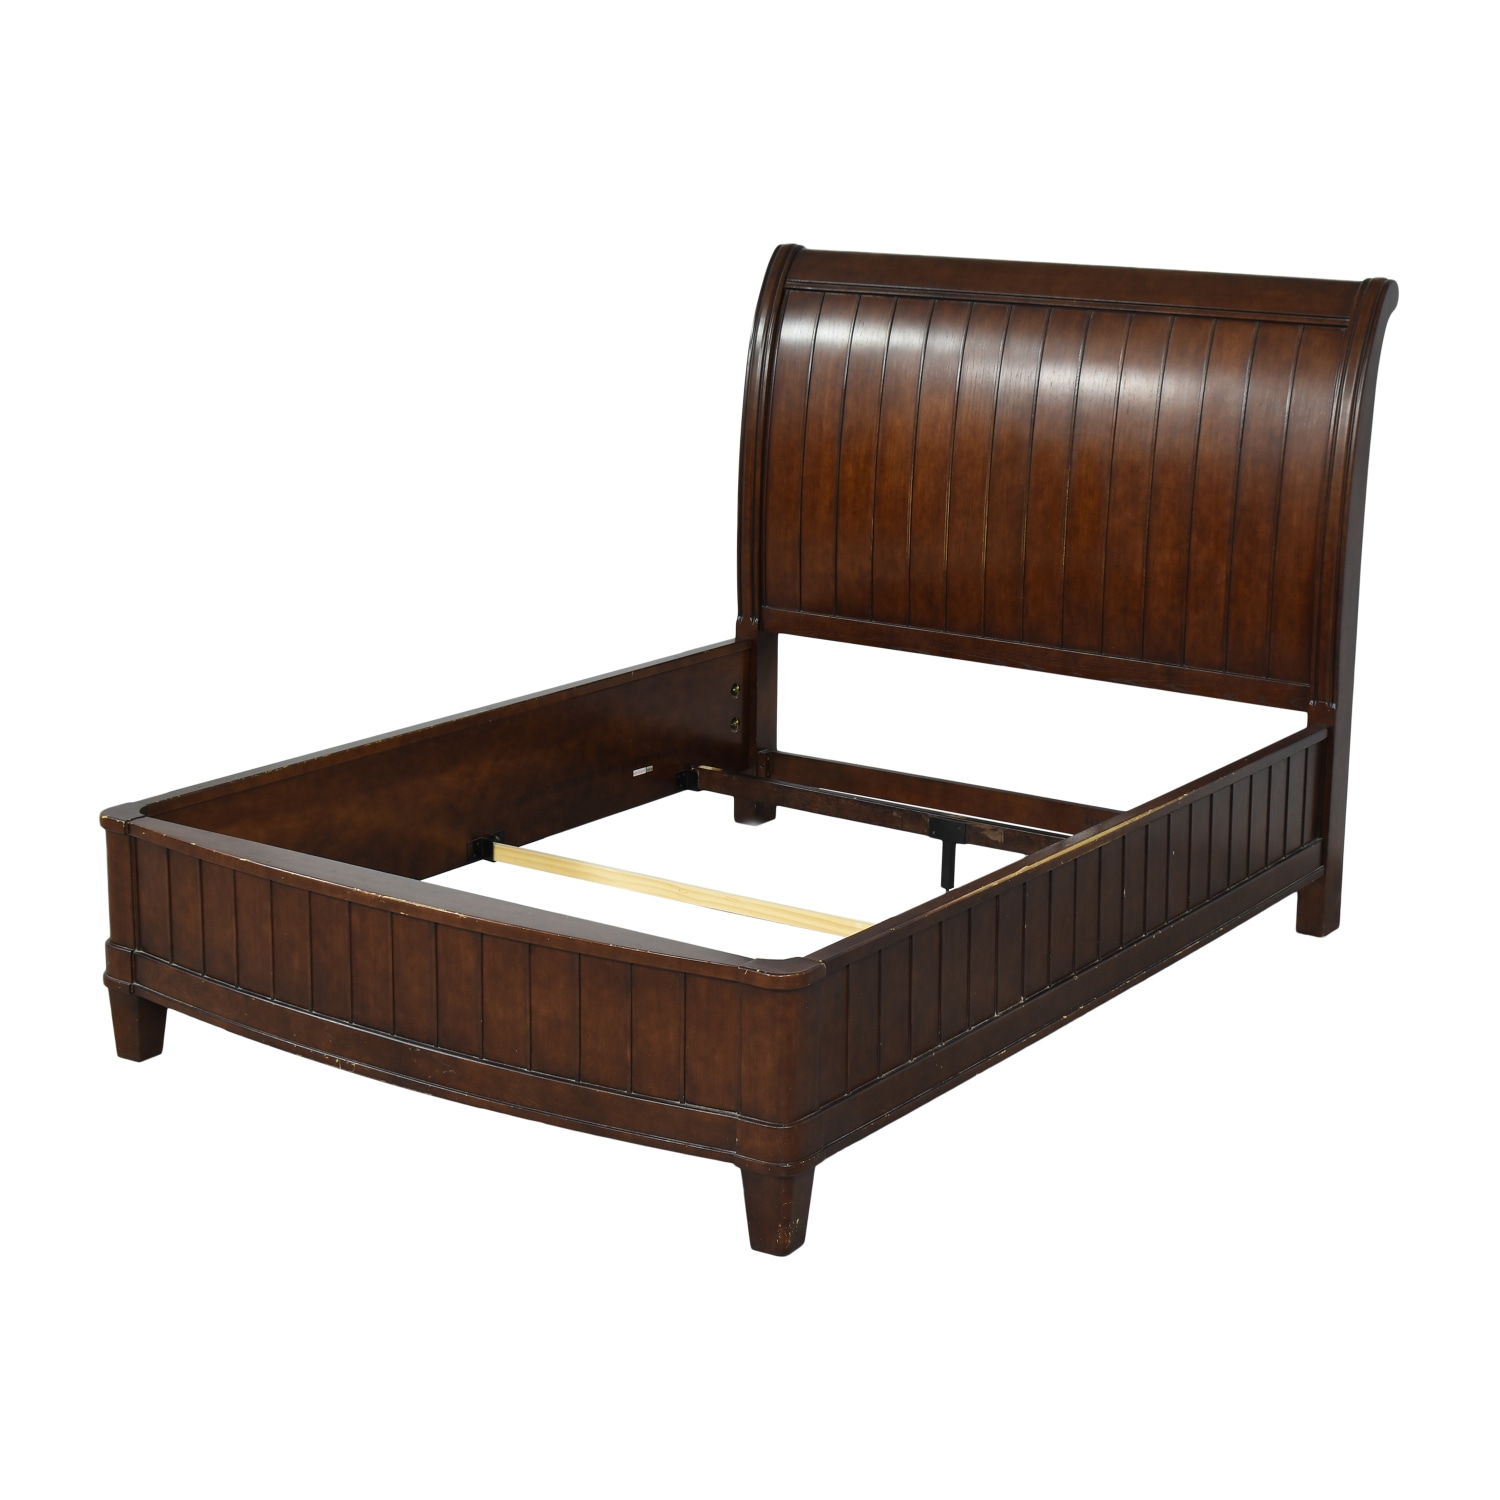  Queen Sleigh Bed nyc